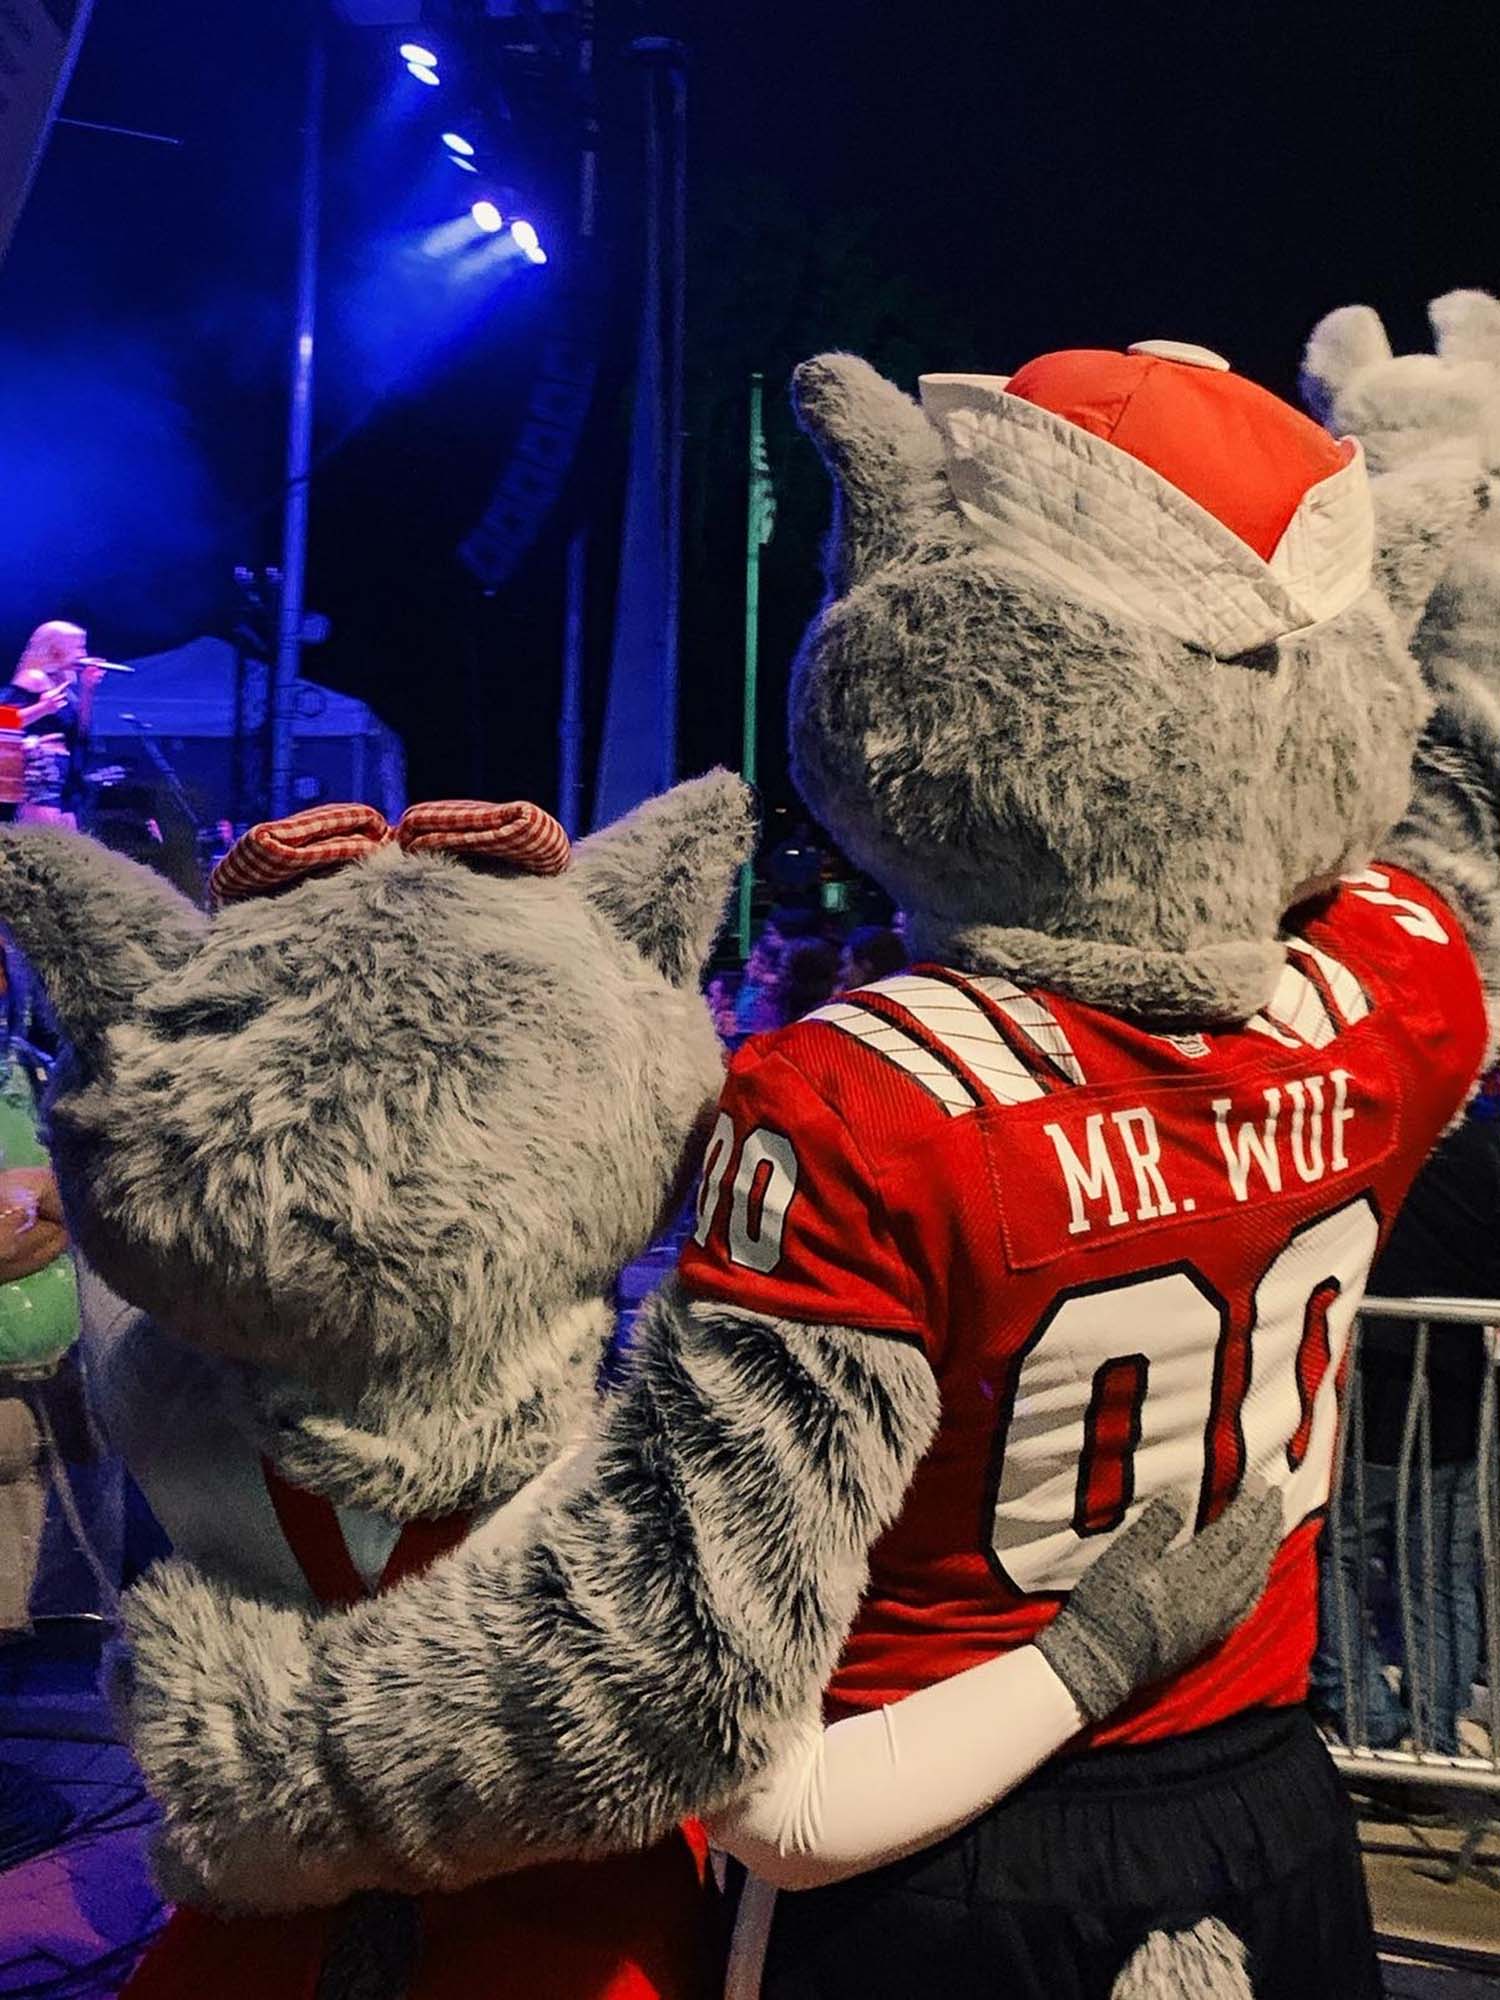 Ms. Wuf and Mr. Wuf throw up their paws during the Packapalooza concert.